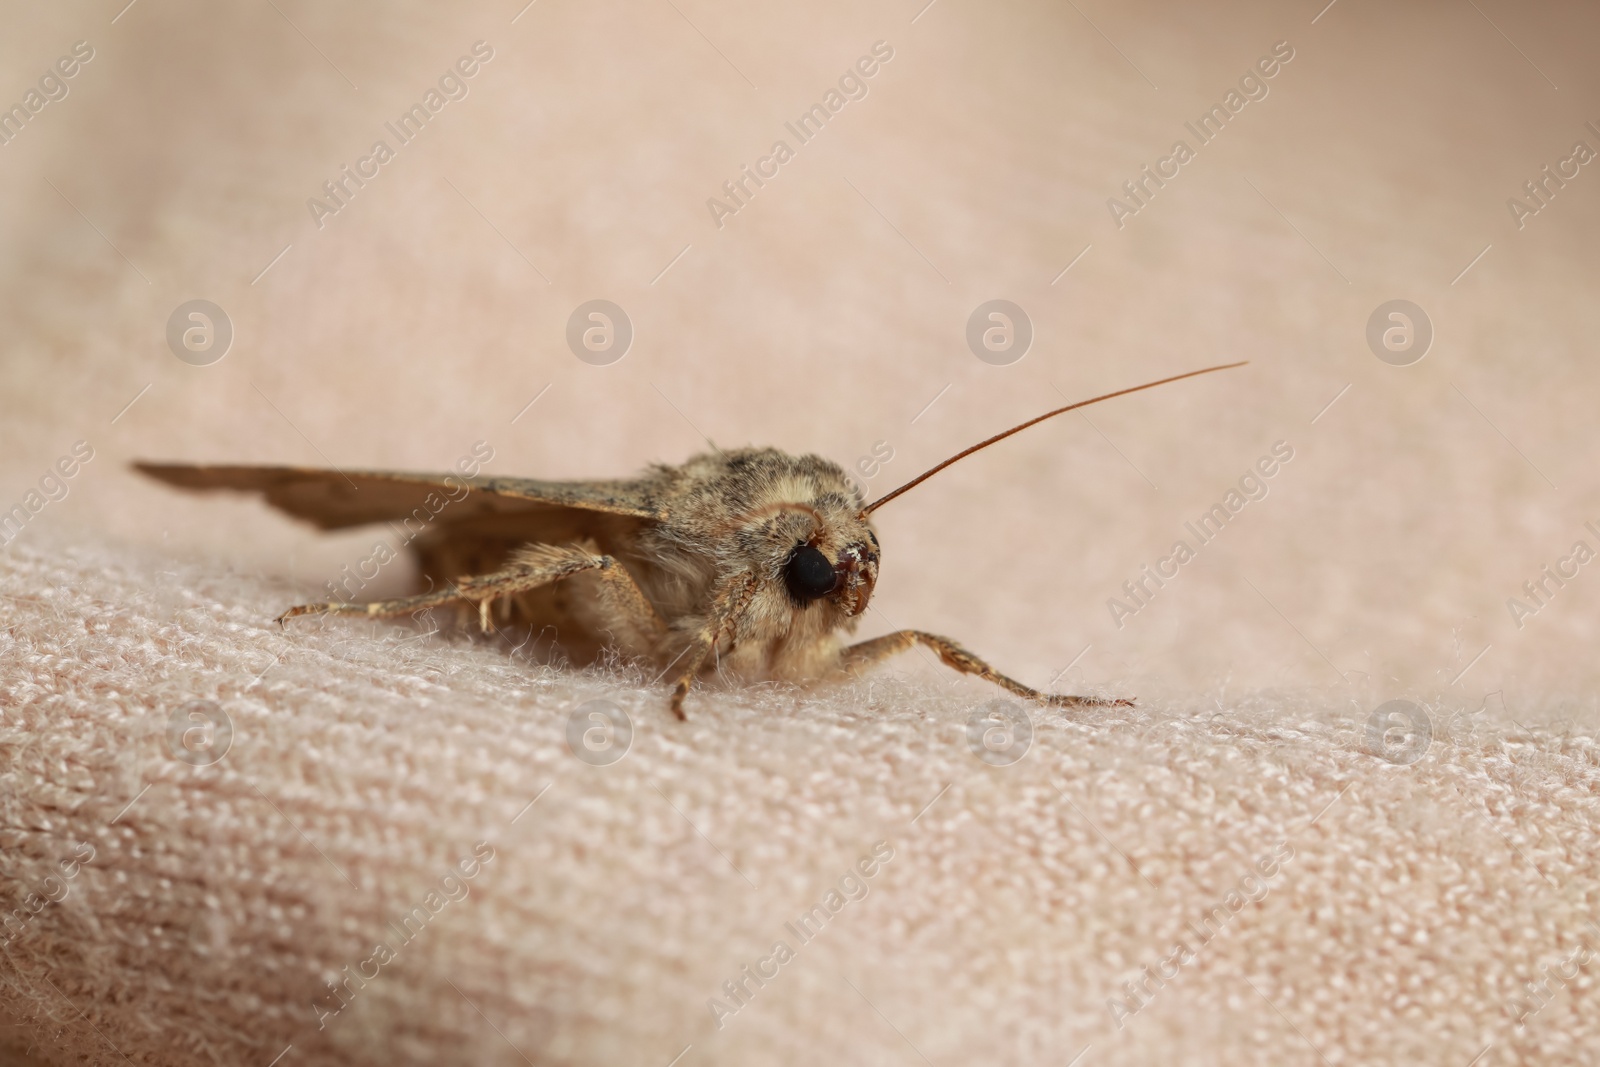 Photo of Paradrina clavipalpis moth with pale mottled wings on color sweater, closeup